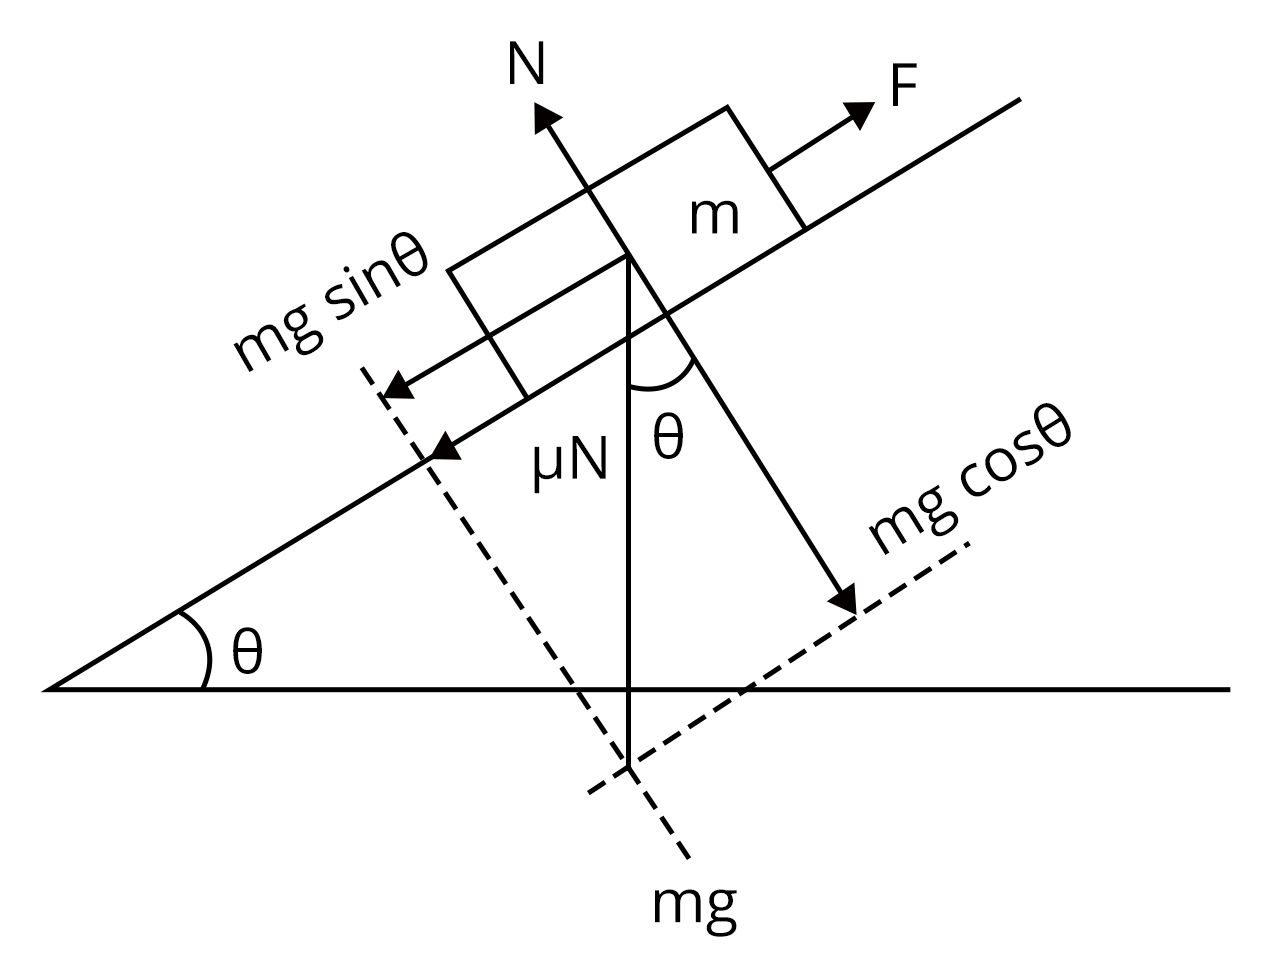 Body is placed on a rough plane inclined at an angle θ to the horizontal